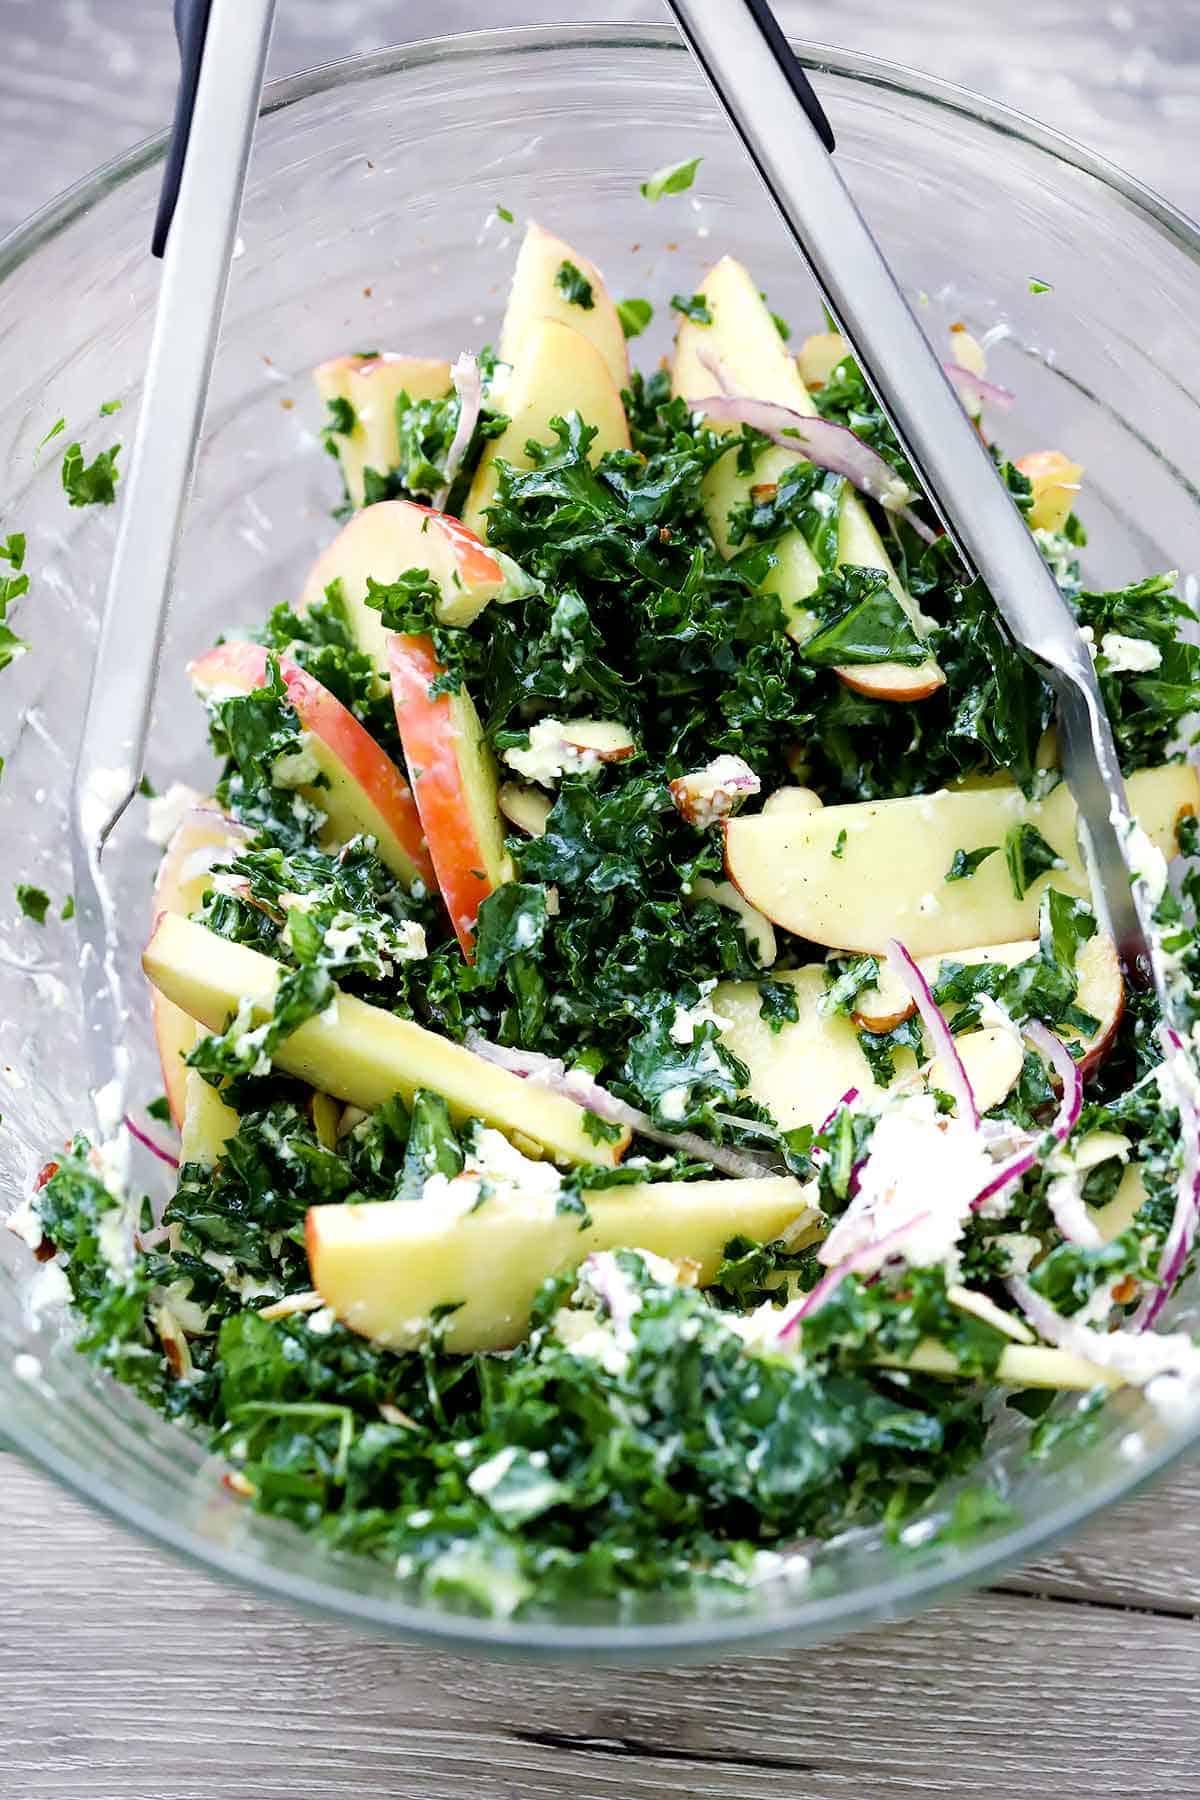 Mixing a kale salad together in a glass bowl with tongs.